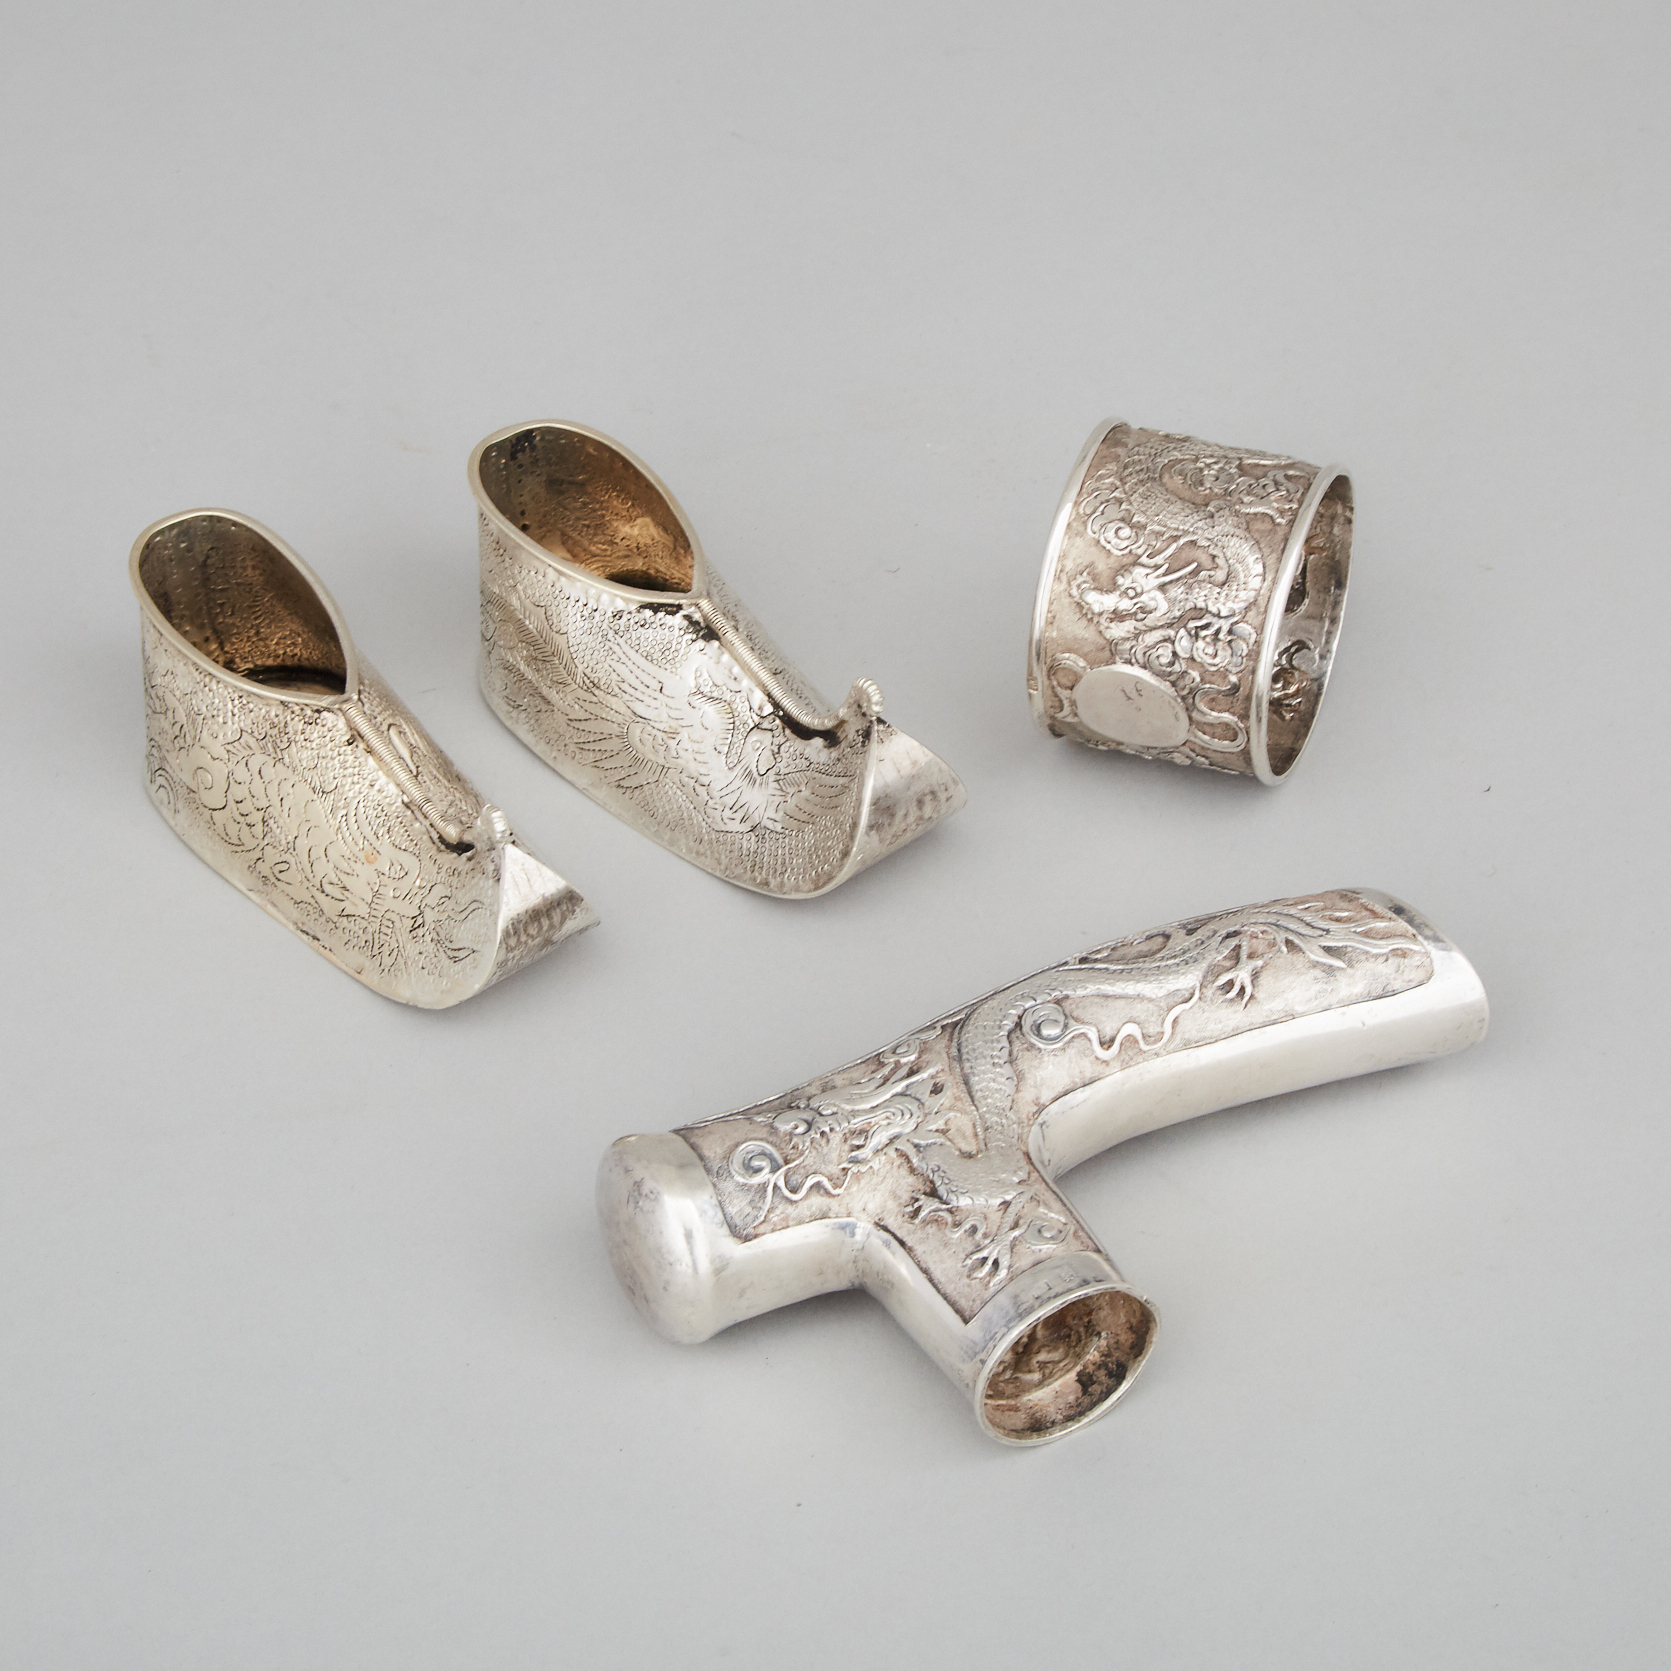 Eastern Silver Cane Handle, Napkin Ring and Two Shoes, 20th century